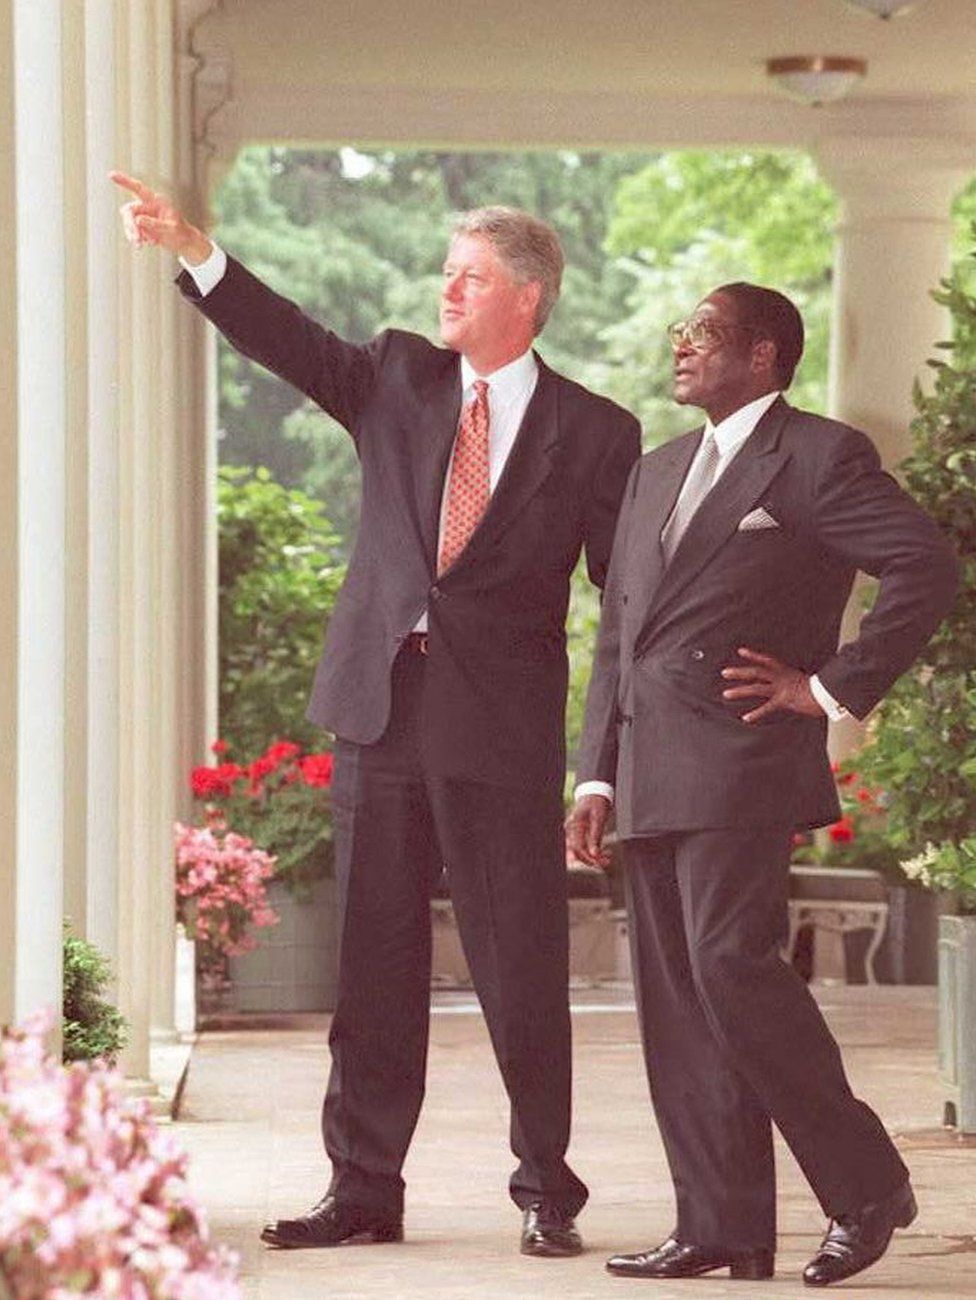 US President Bill Clinton points to items of interest on the White House grounds to President Robert Mugabe, 1995